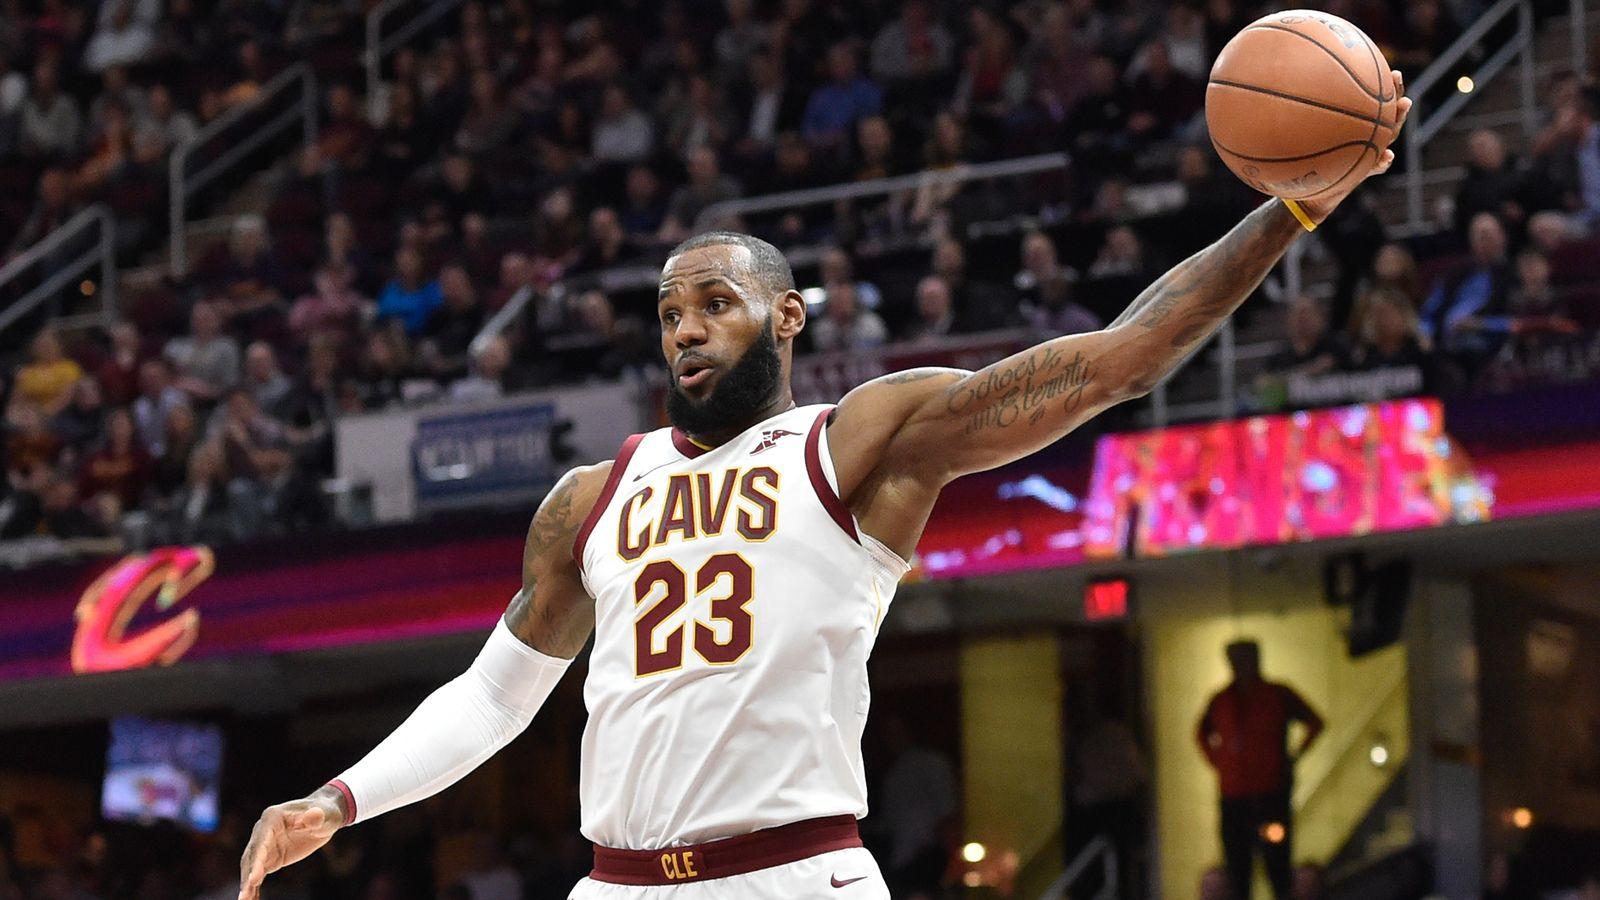 WATCH: LeBron James with an absolutely filthy dunk